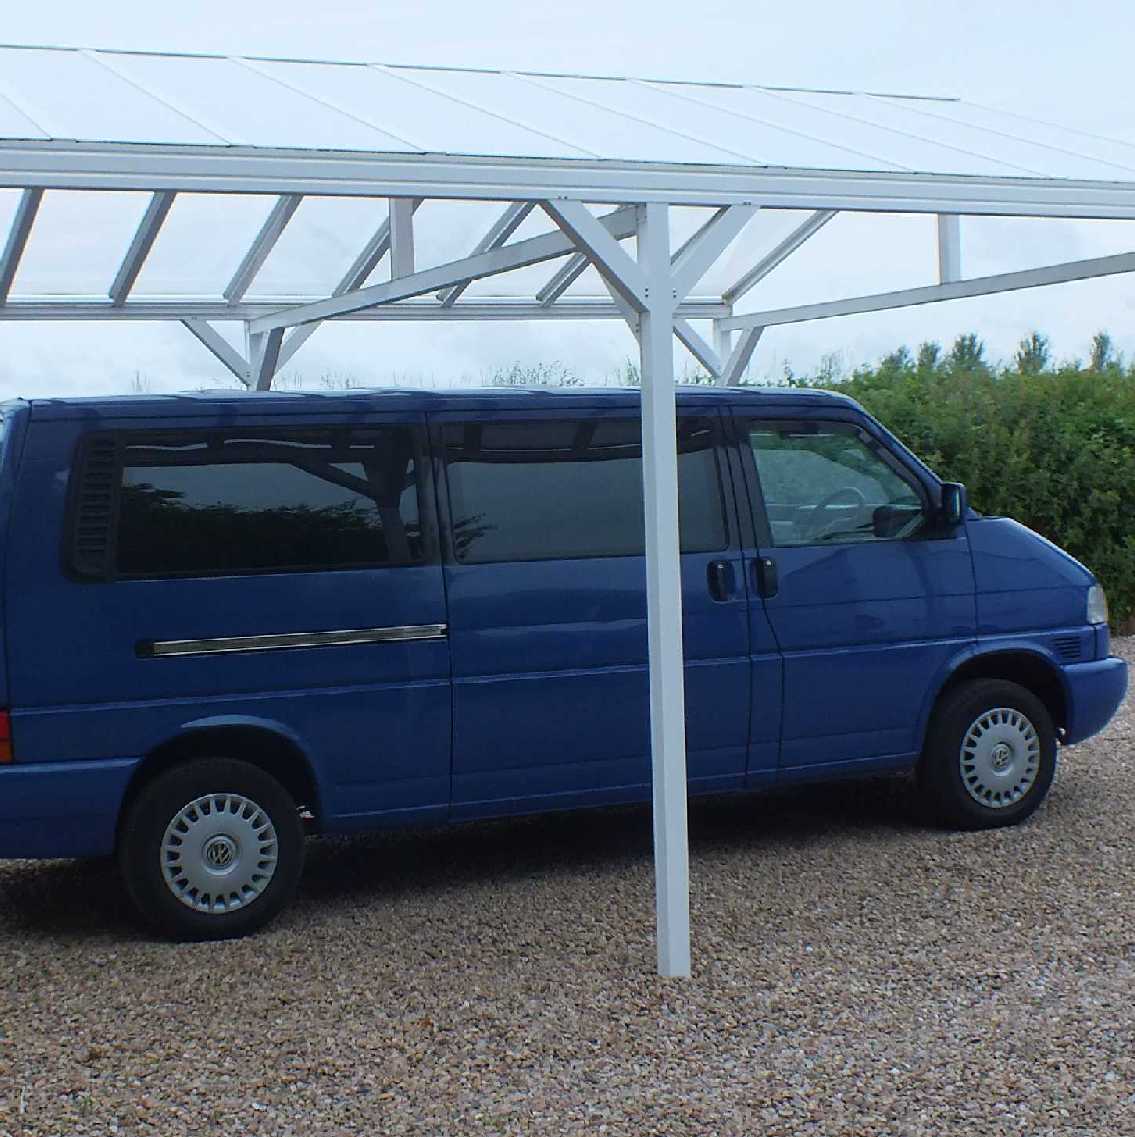 Great deals on Omega Smart Free-Standing, White Gable-Roof (type 1) Canopy with 16mm Polycarbonate Glazing - 6.3m (W) x 4.0m (P), (8) Supporting Posts